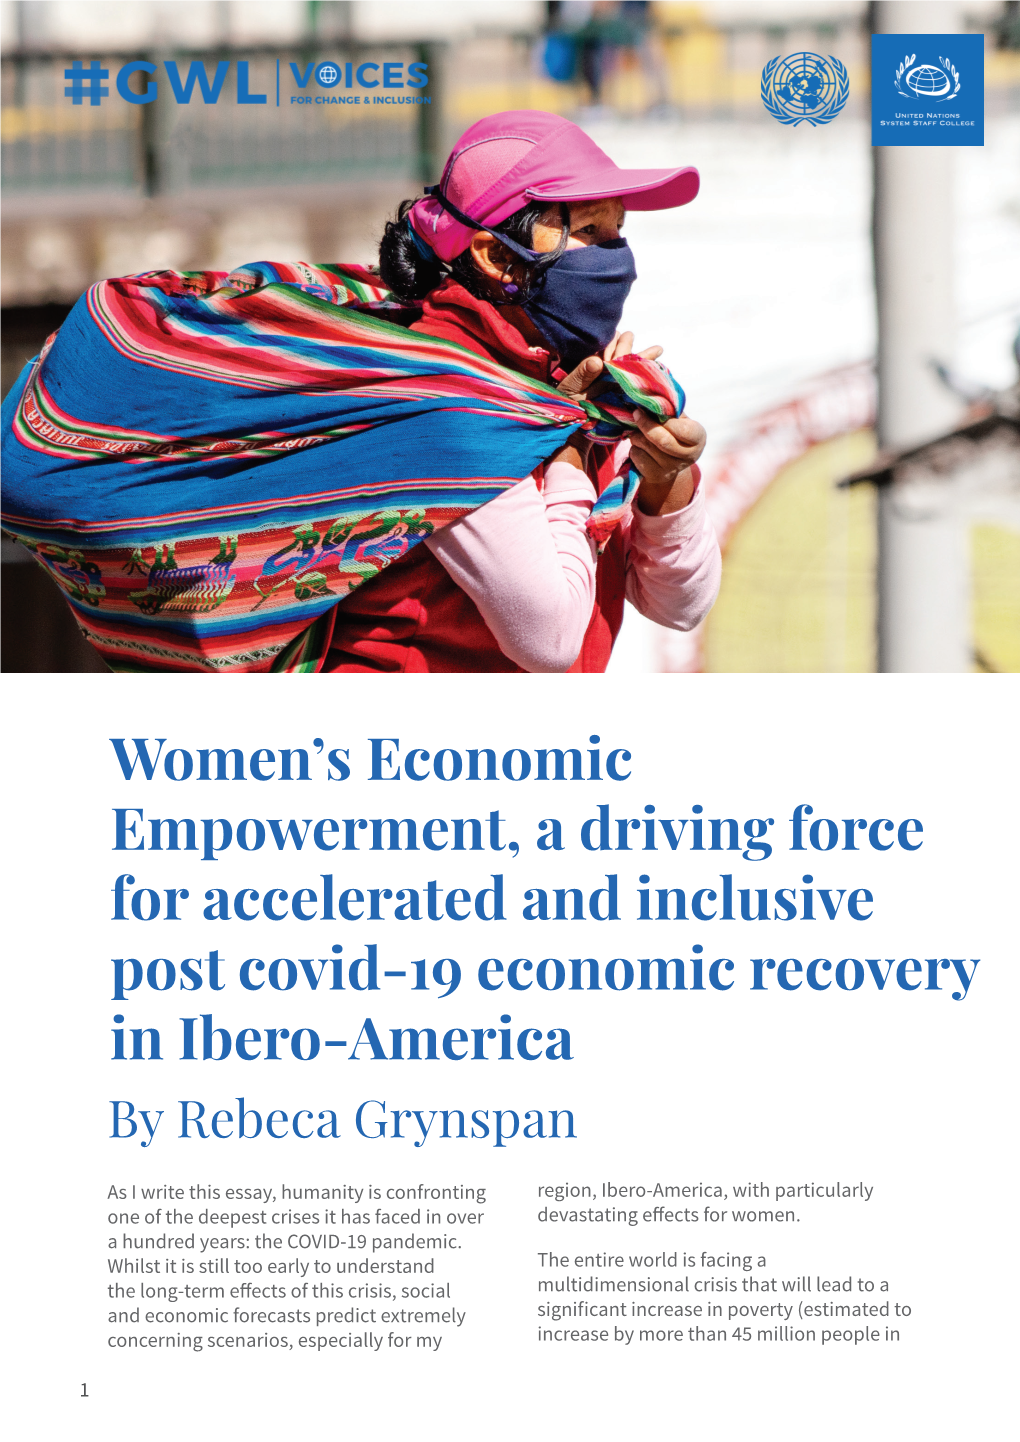 Women's Economic Empowerment, a Driving Force for Accelerated And